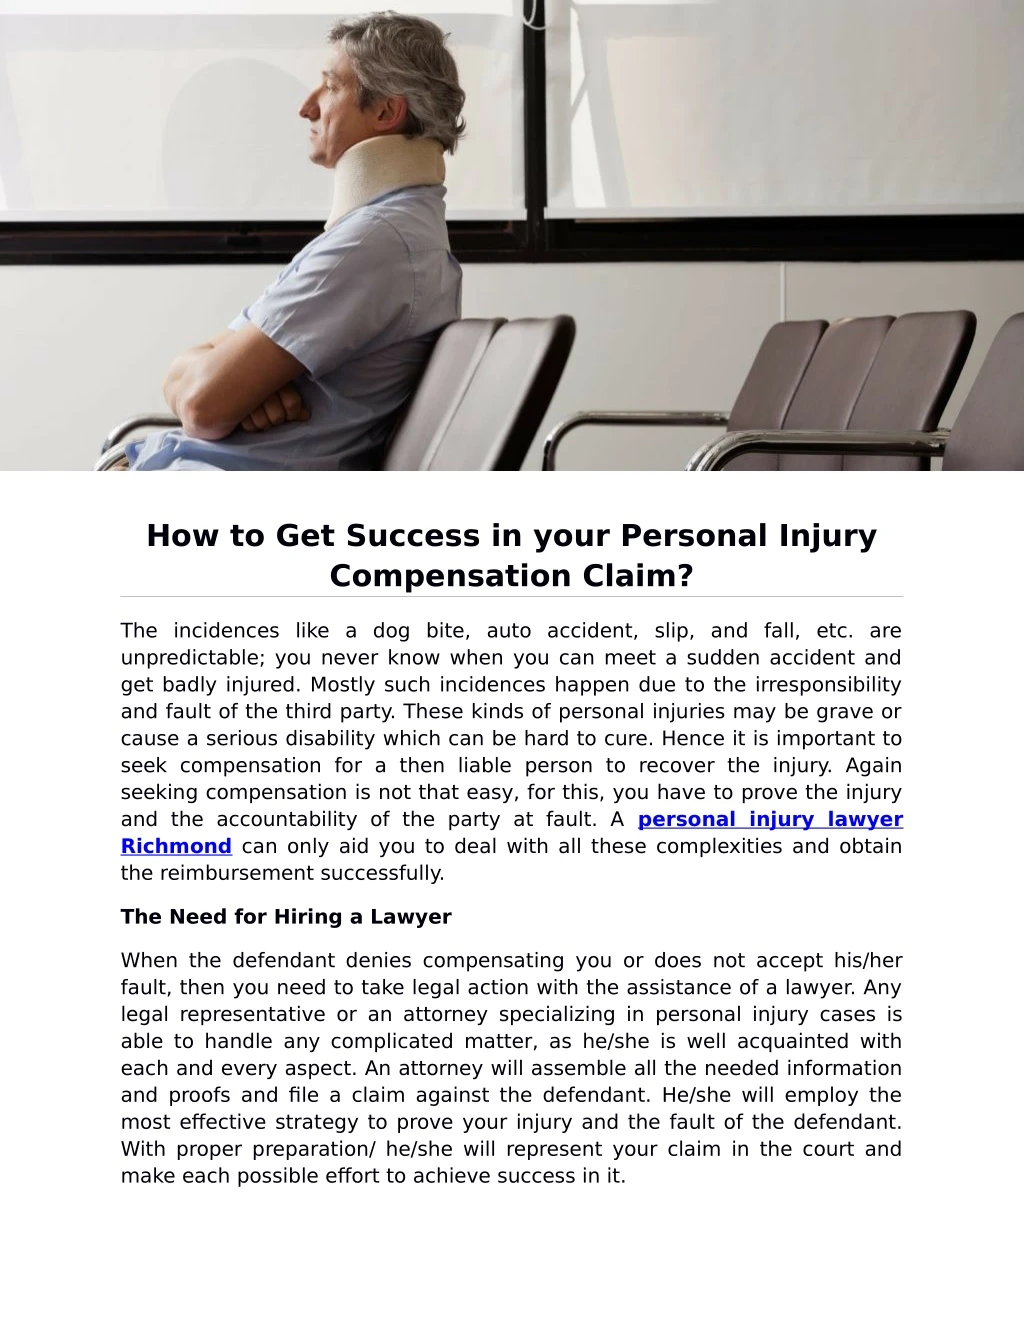 how to get success in your personal injury